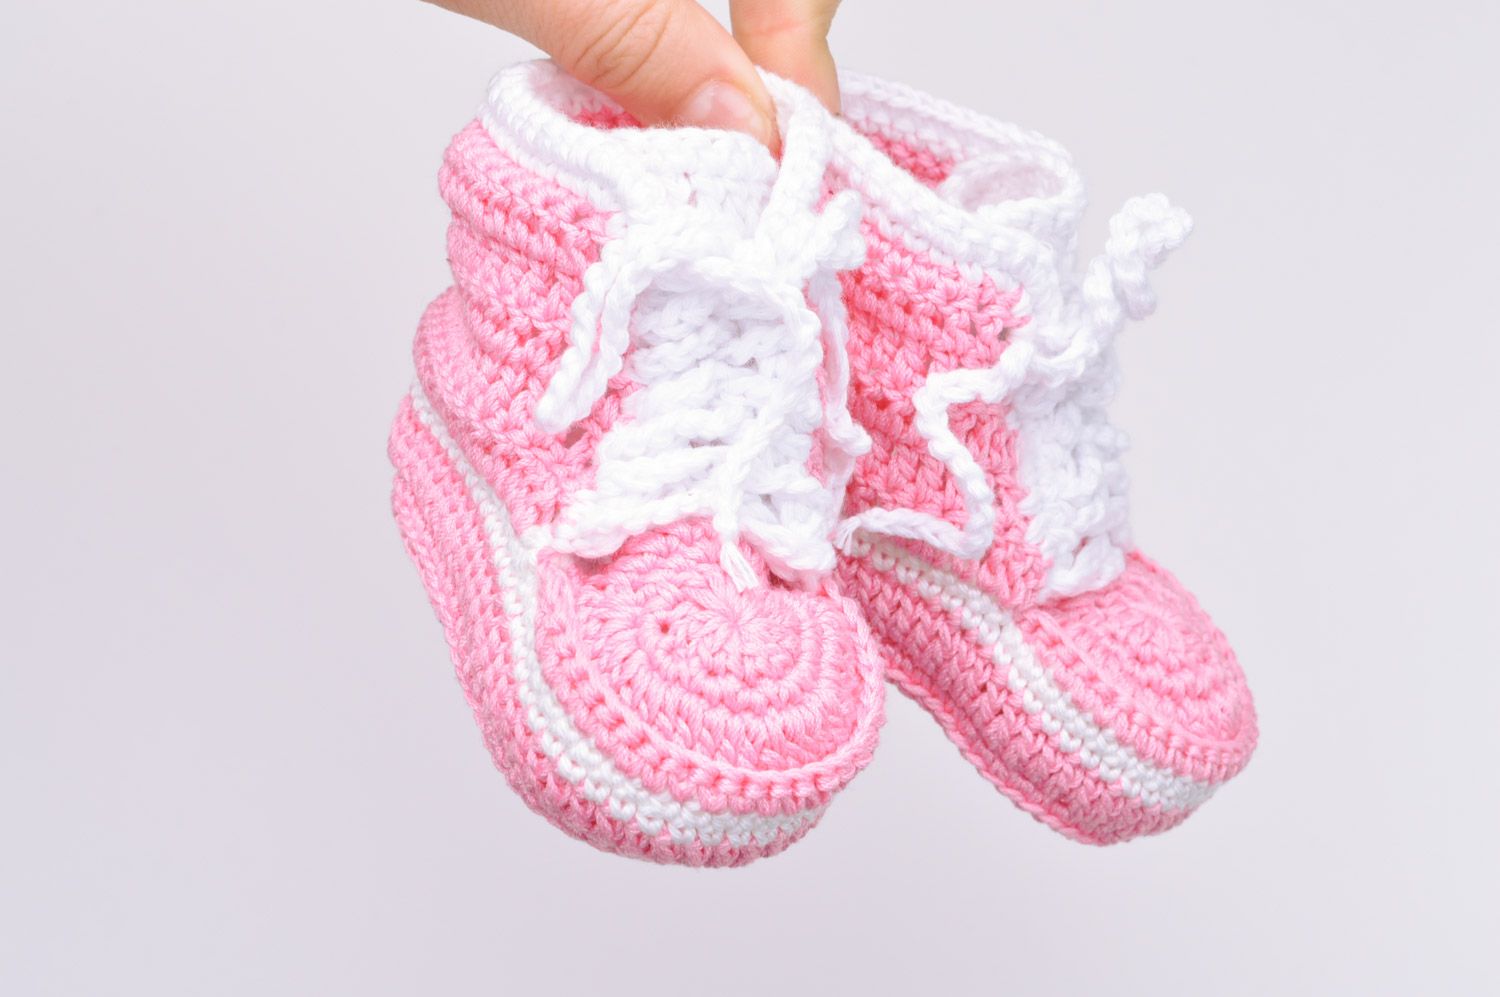 Handmade crocheted pink booties made of cotton in the form of sneakers for girls photo 3